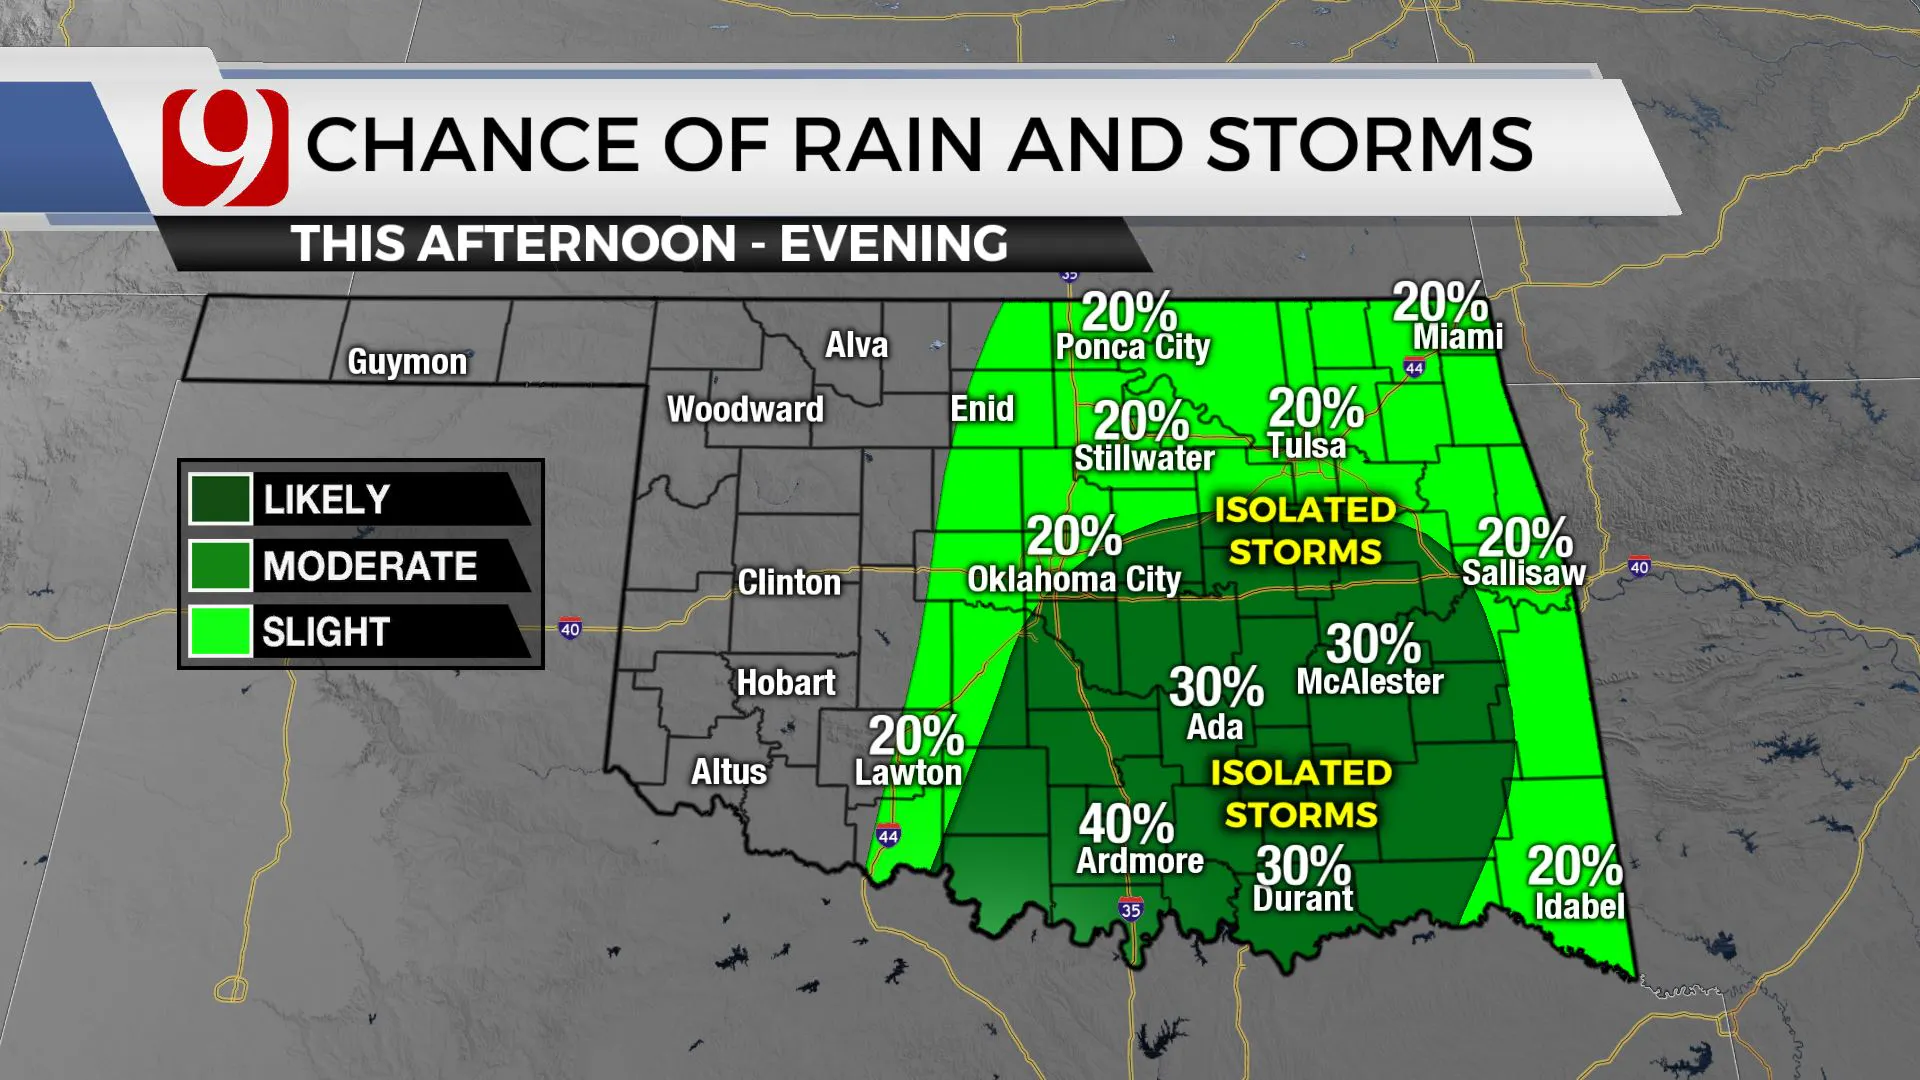 CHANCE OF RAIN/STORMS